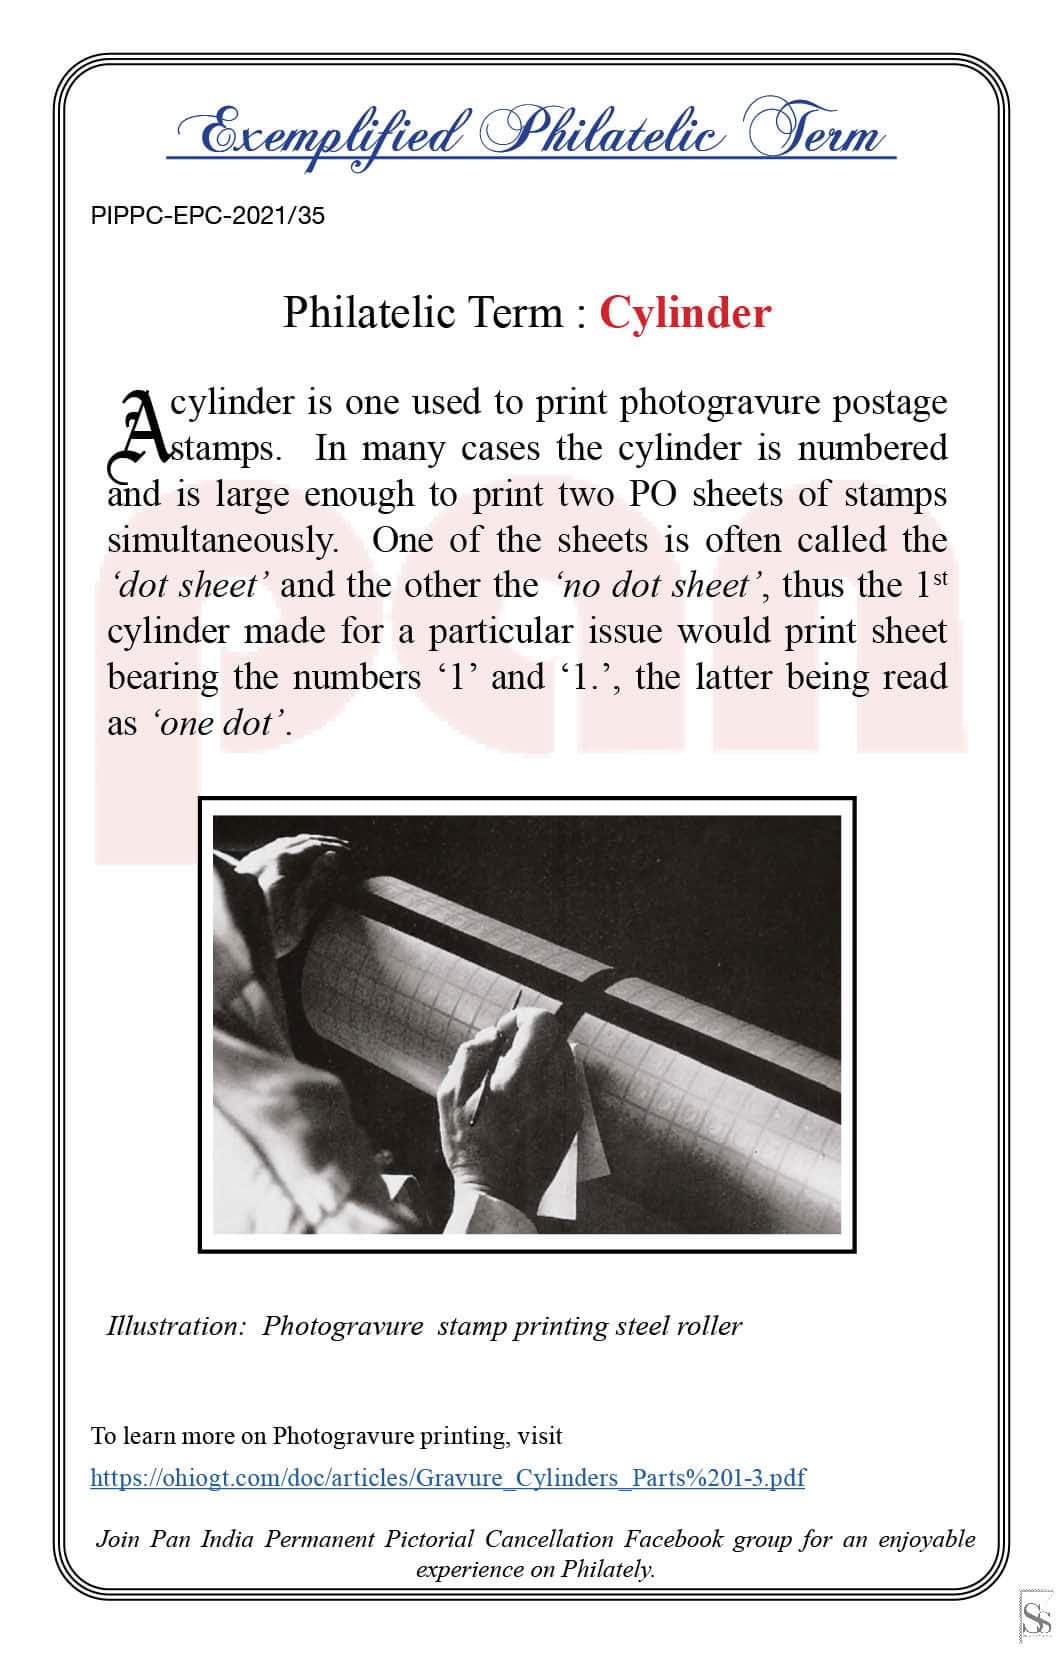 35. Today's Exemplified Philatelic term- Cylinder